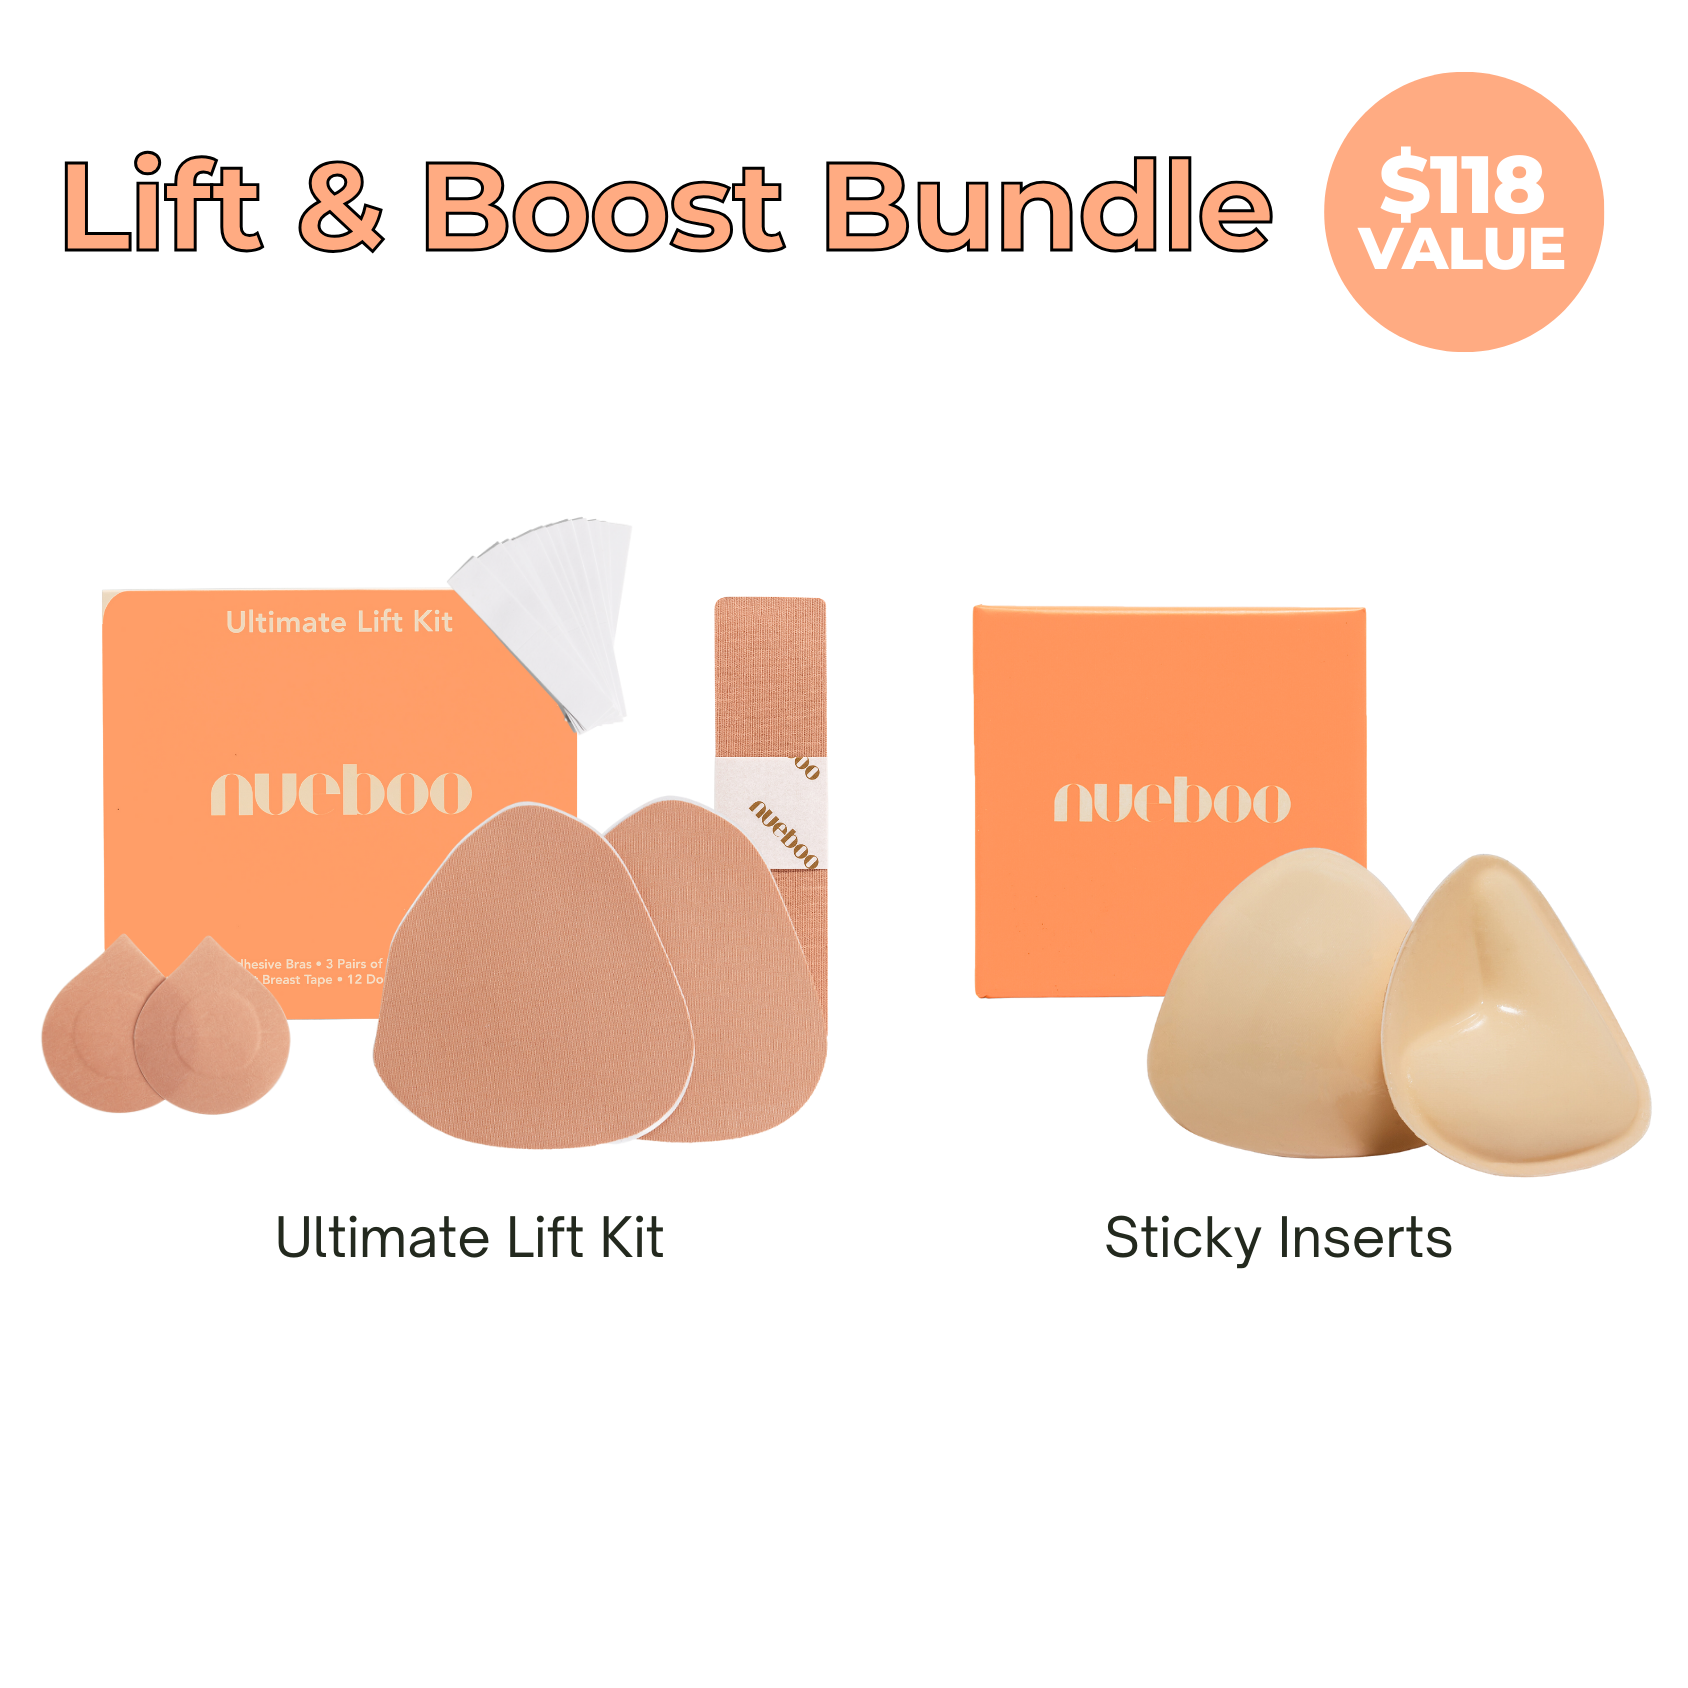 Nueboo sticky inserts are here to boost your bust in comfort this